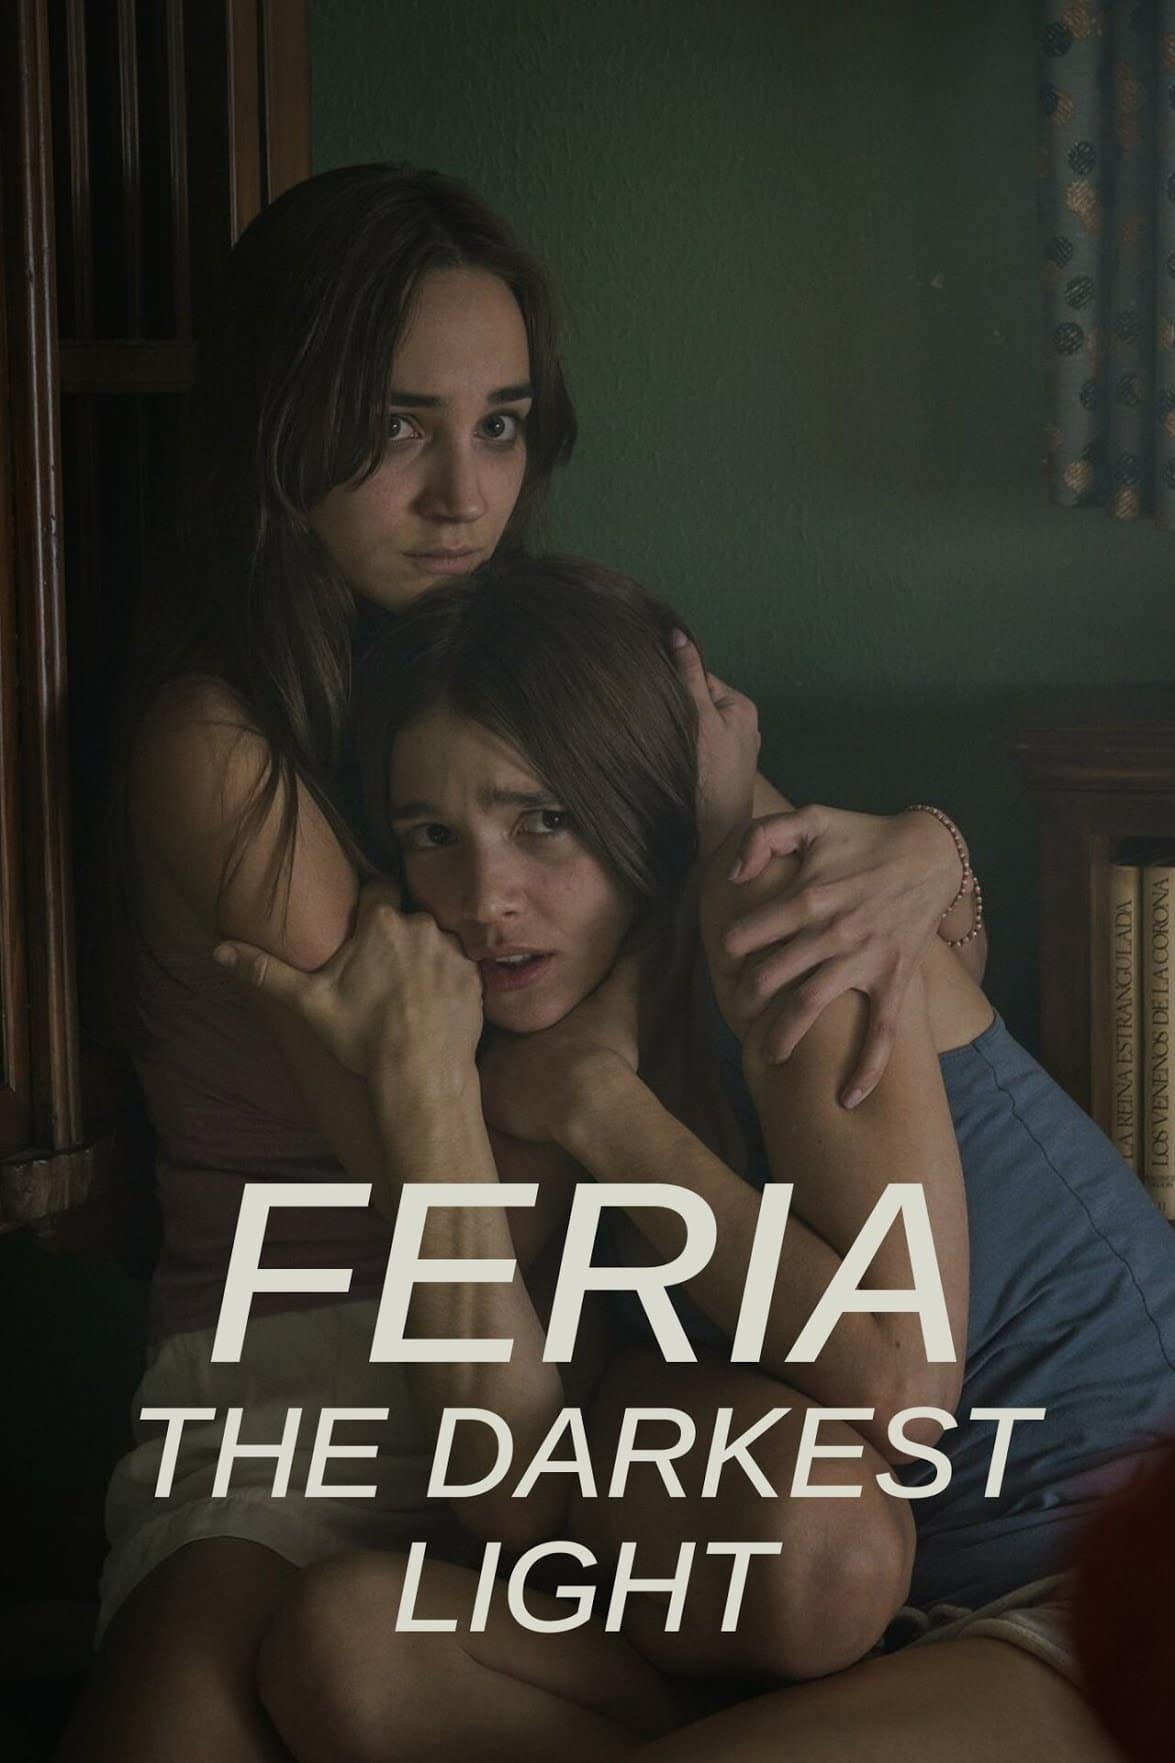 Feria: The Darkest Light - Cast, Summary, Synopsis, OST, Episode, Review